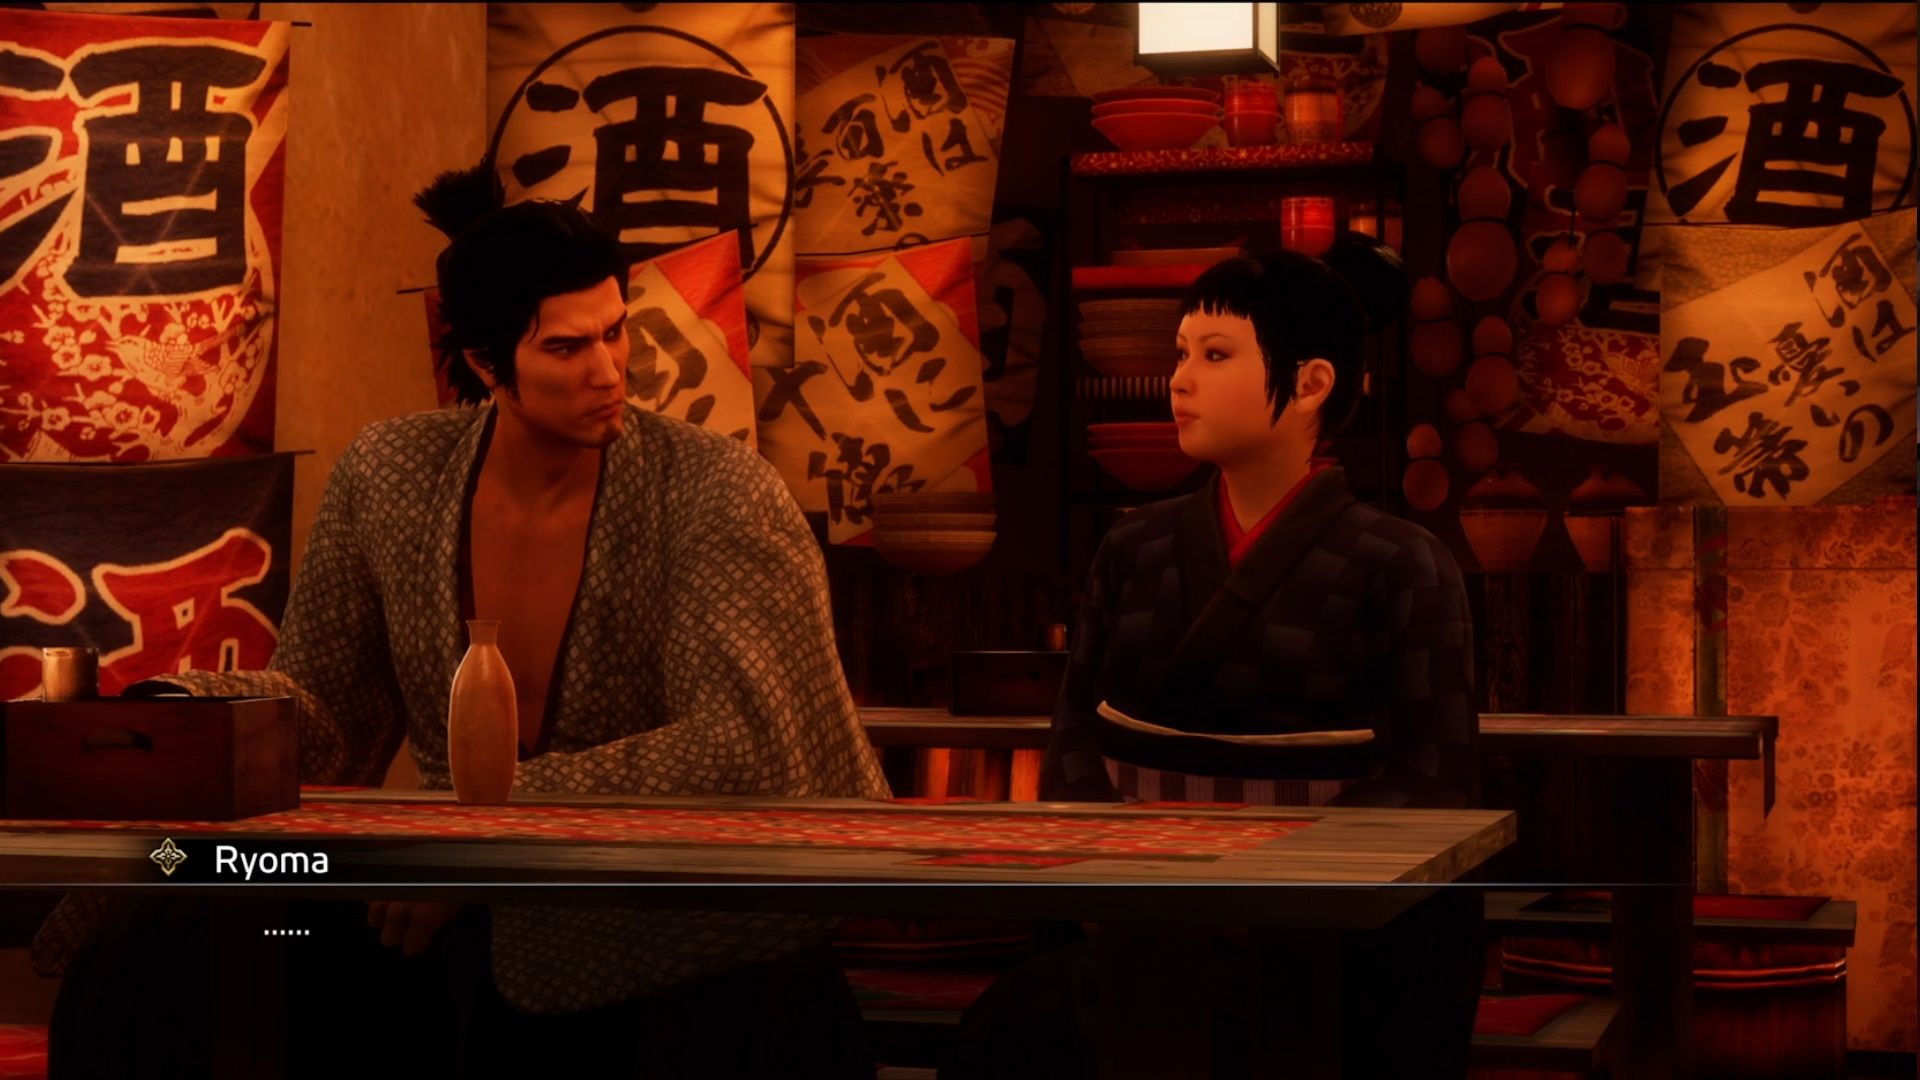 Like A Dragon Ishin, Ryoma's drinking is disturbed by a mysterious woman